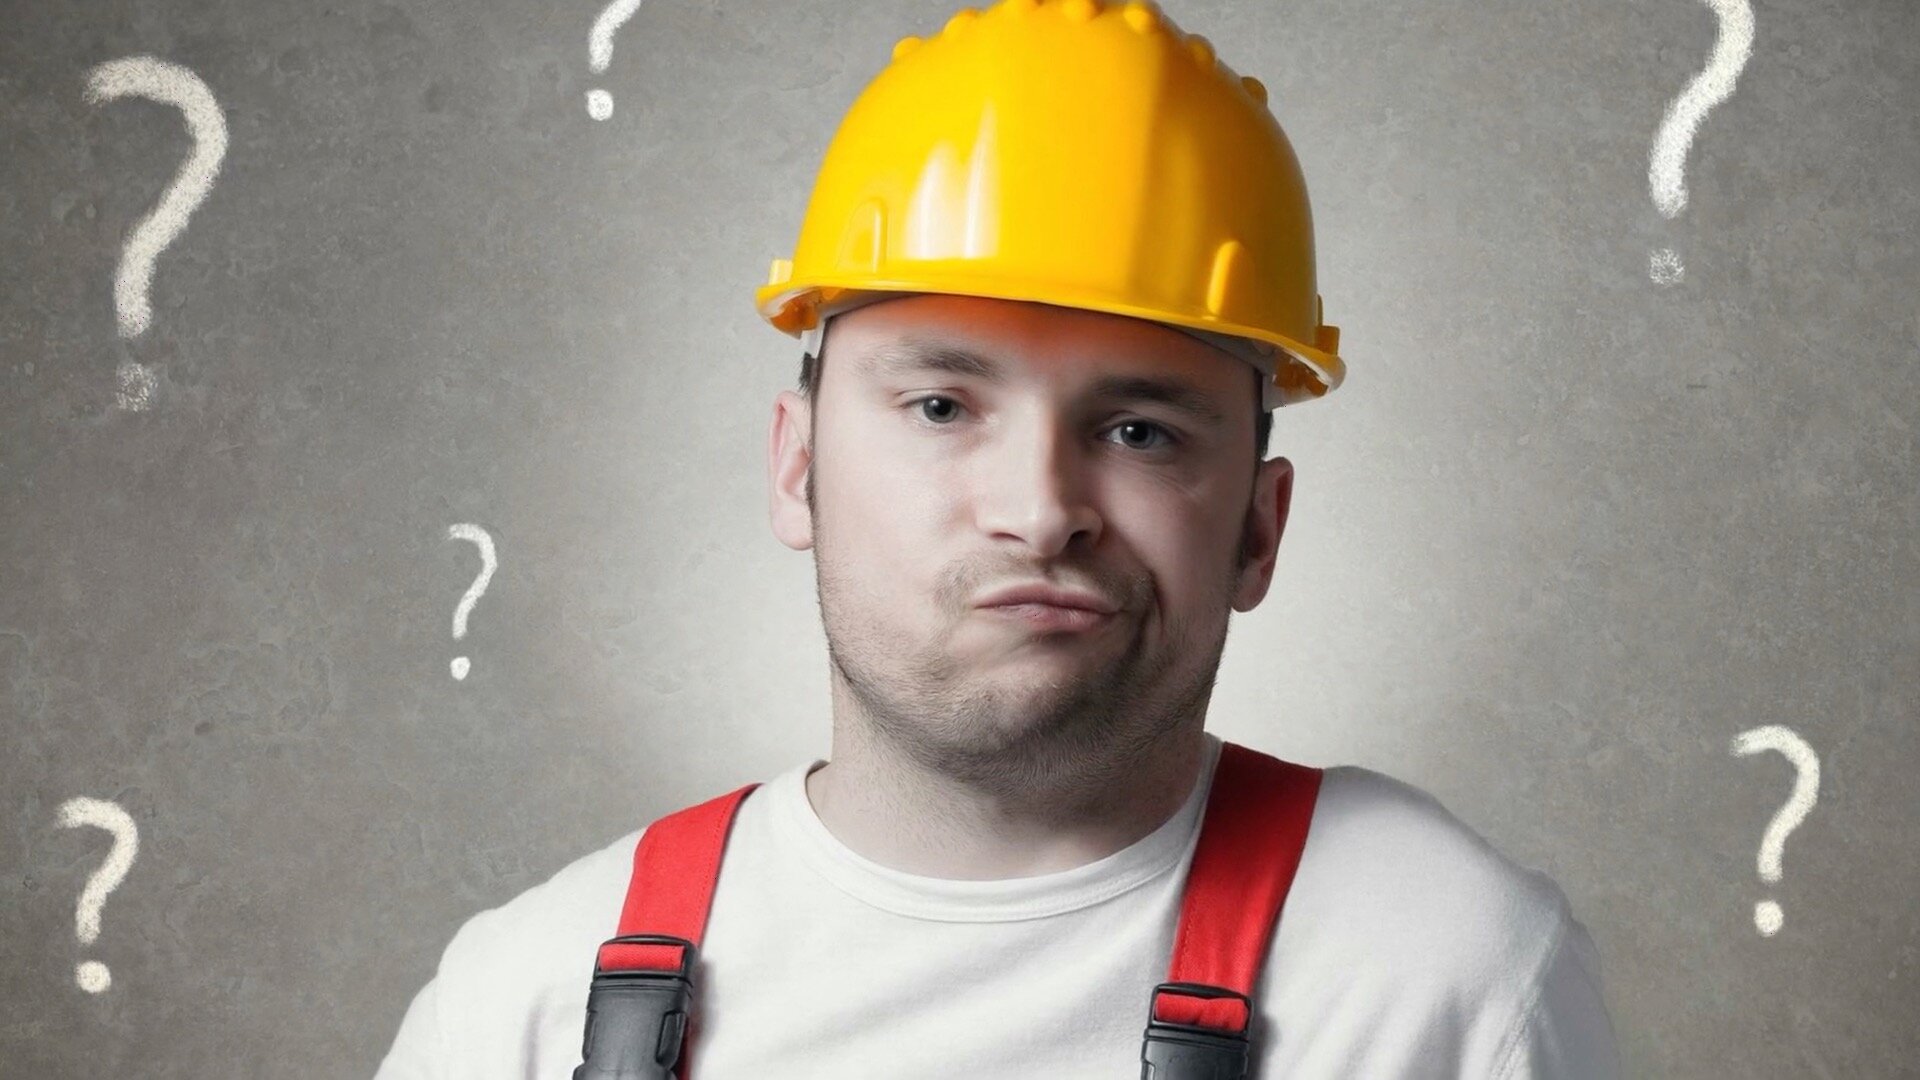 Frustrated Construction Worker.jpg